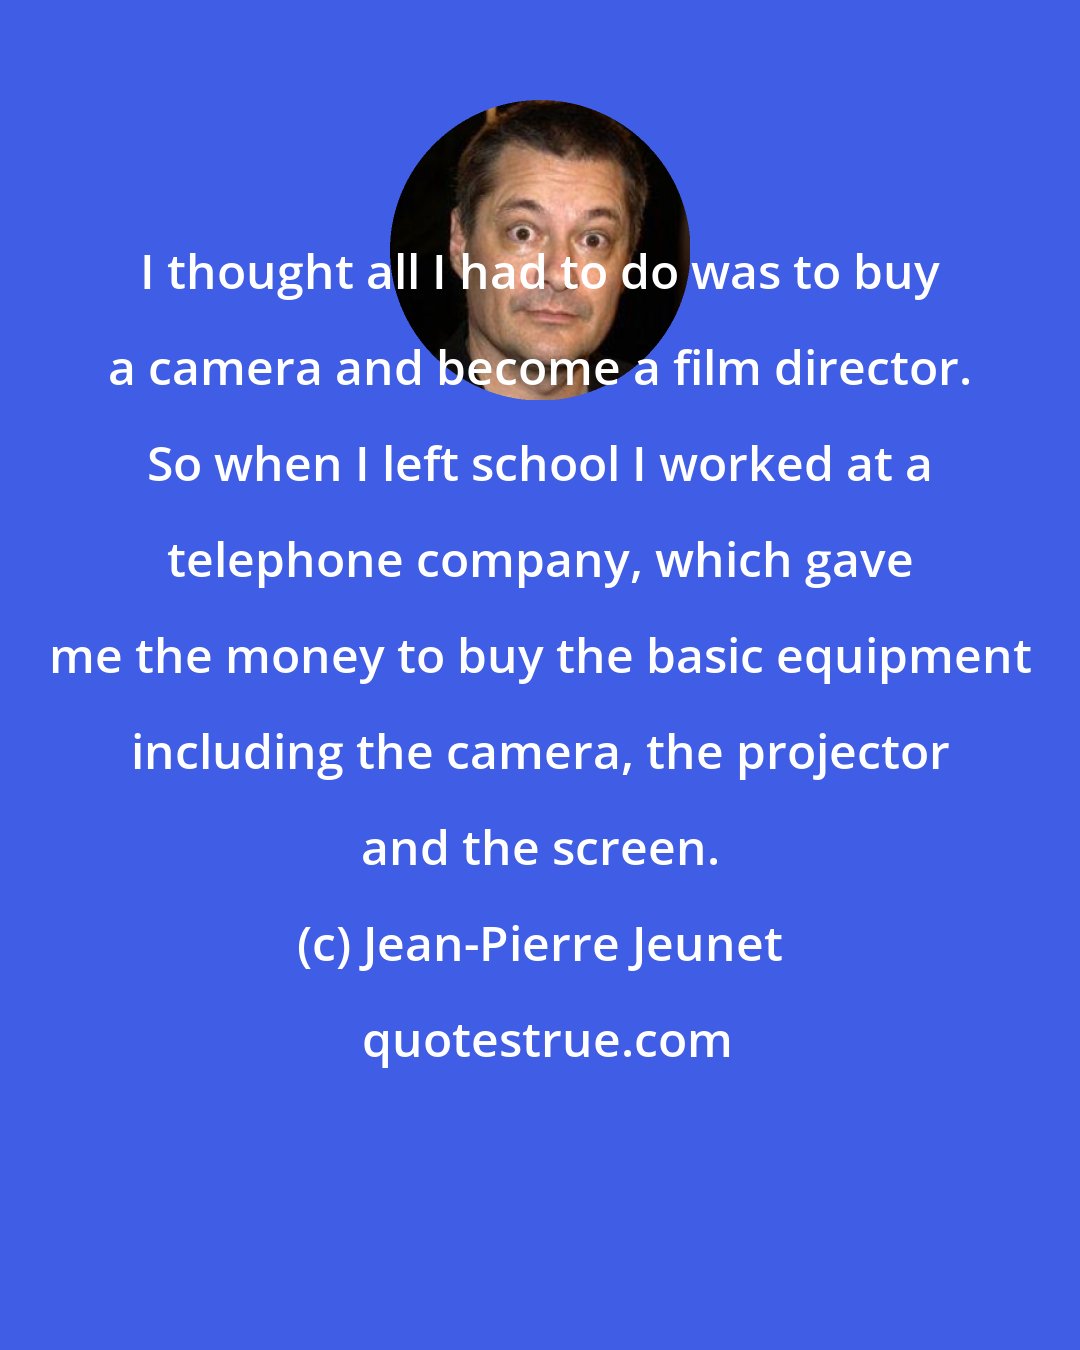 Jean-Pierre Jeunet: I thought all I had to do was to buy a camera and become a film director. So when I left school I worked at a telephone company, which gave me the money to buy the basic equipment including the camera, the projector and the screen.